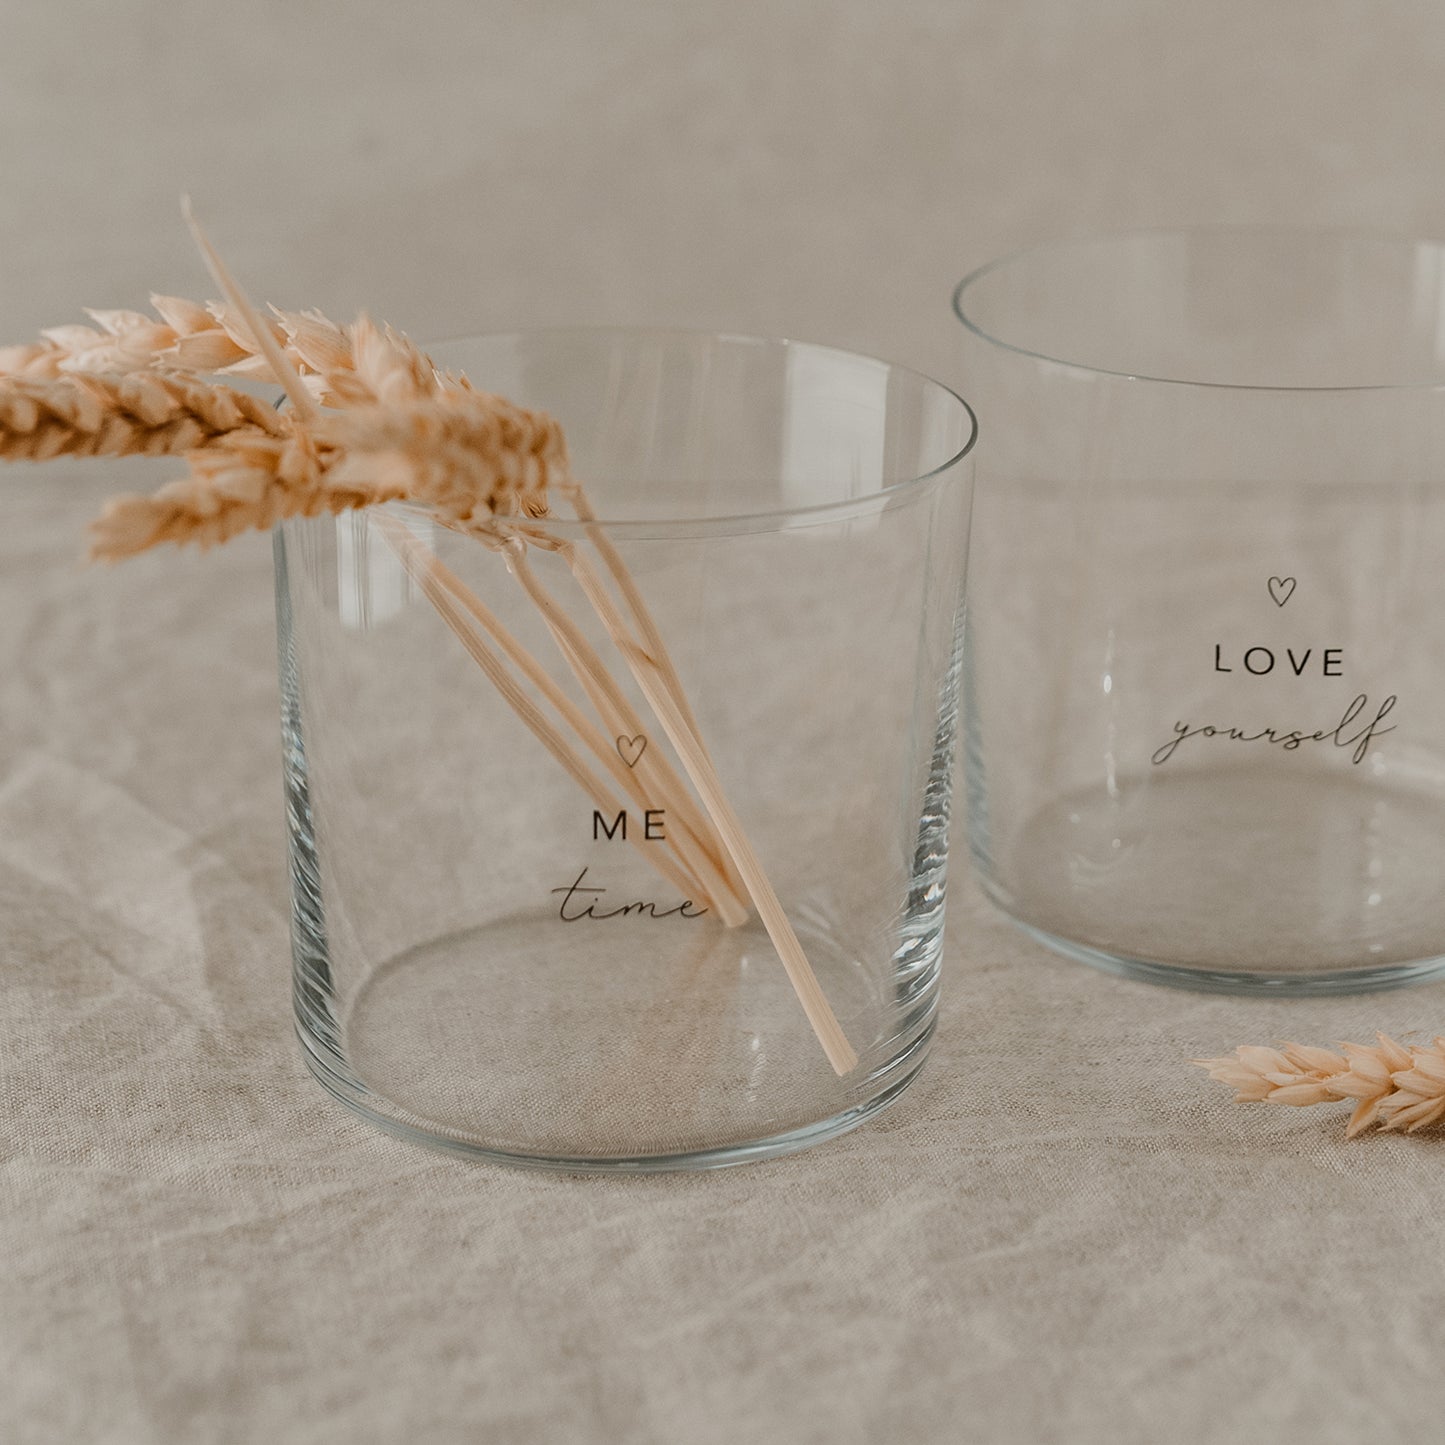 Drinking glass in a set of 2 Self love